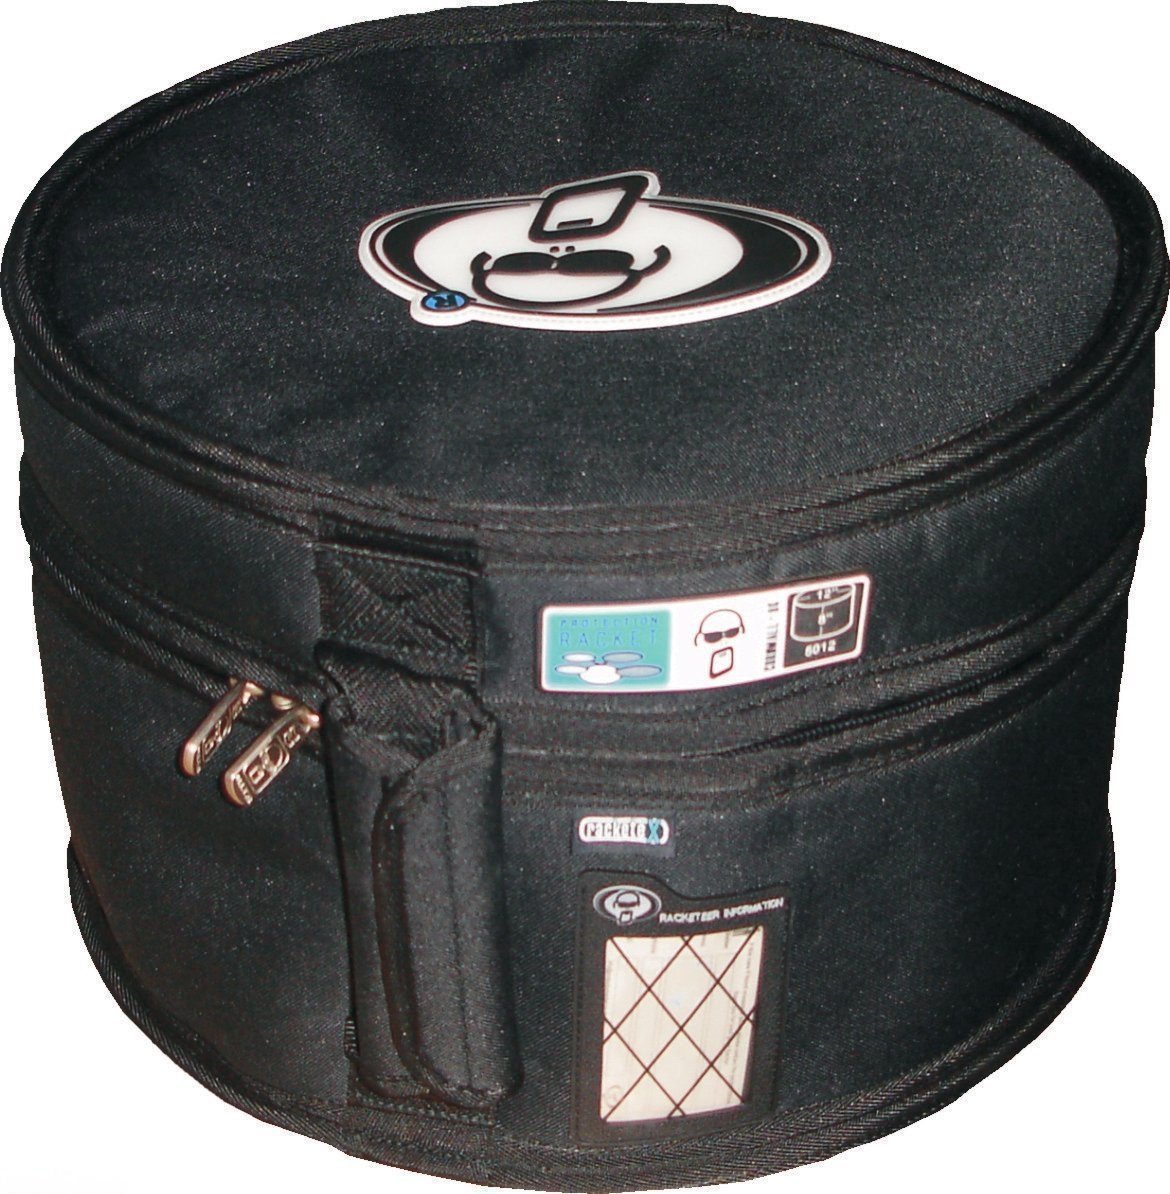 Hoes voor Tom-Tom Transition Protection Racket 5107R-00 Hoes voor Tom-Tom Transition